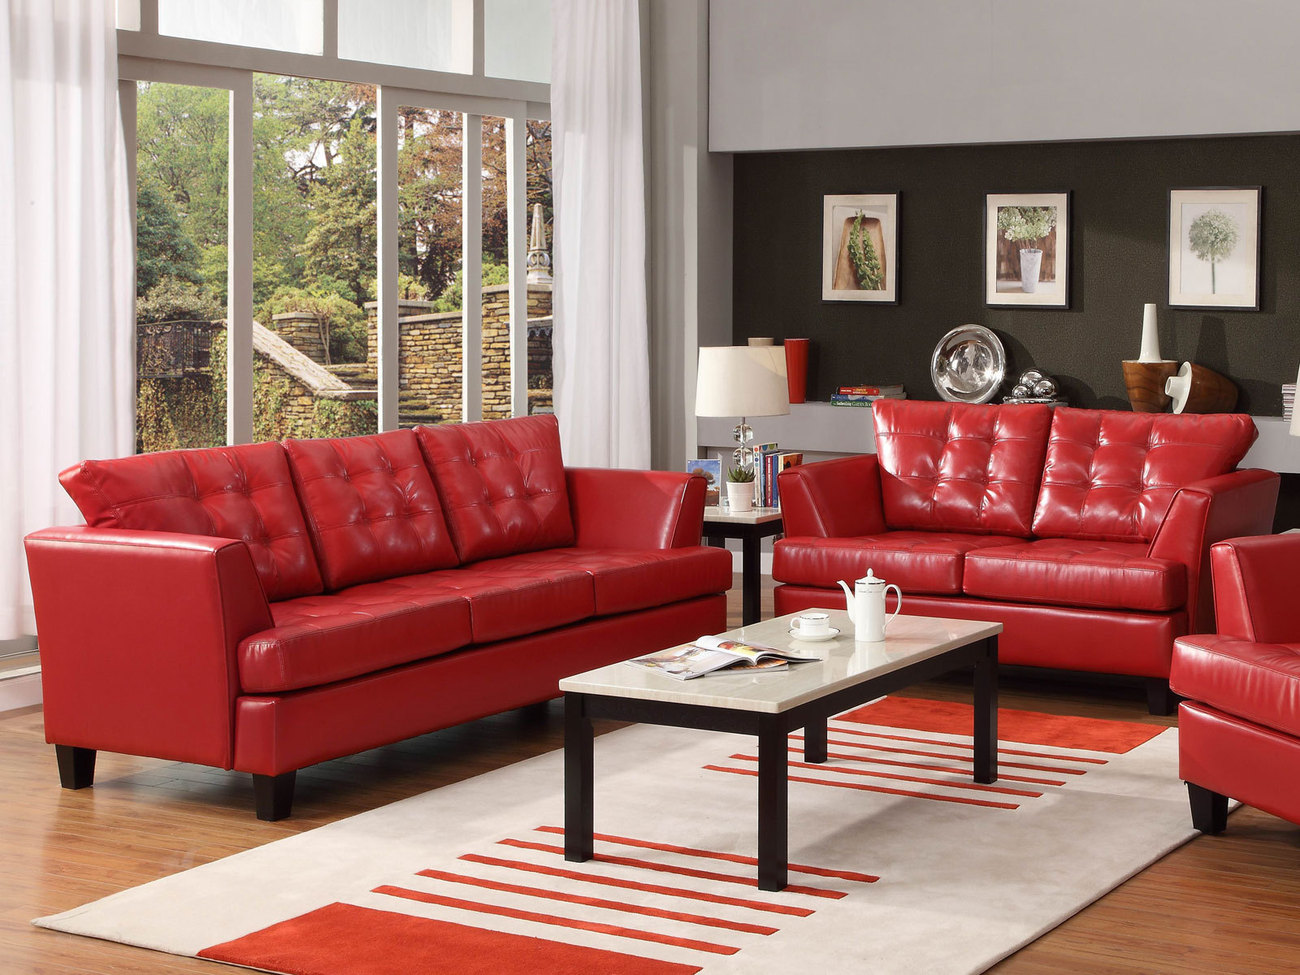 Living Room Red Amazing Living Room Design With Red Leather Sofa Dark Brown Wooden Table And White Colored Carpet Placed On The Floor Furniture Outstanding Living Room Furnished With A Red Leather Couch Or Sofa Sets